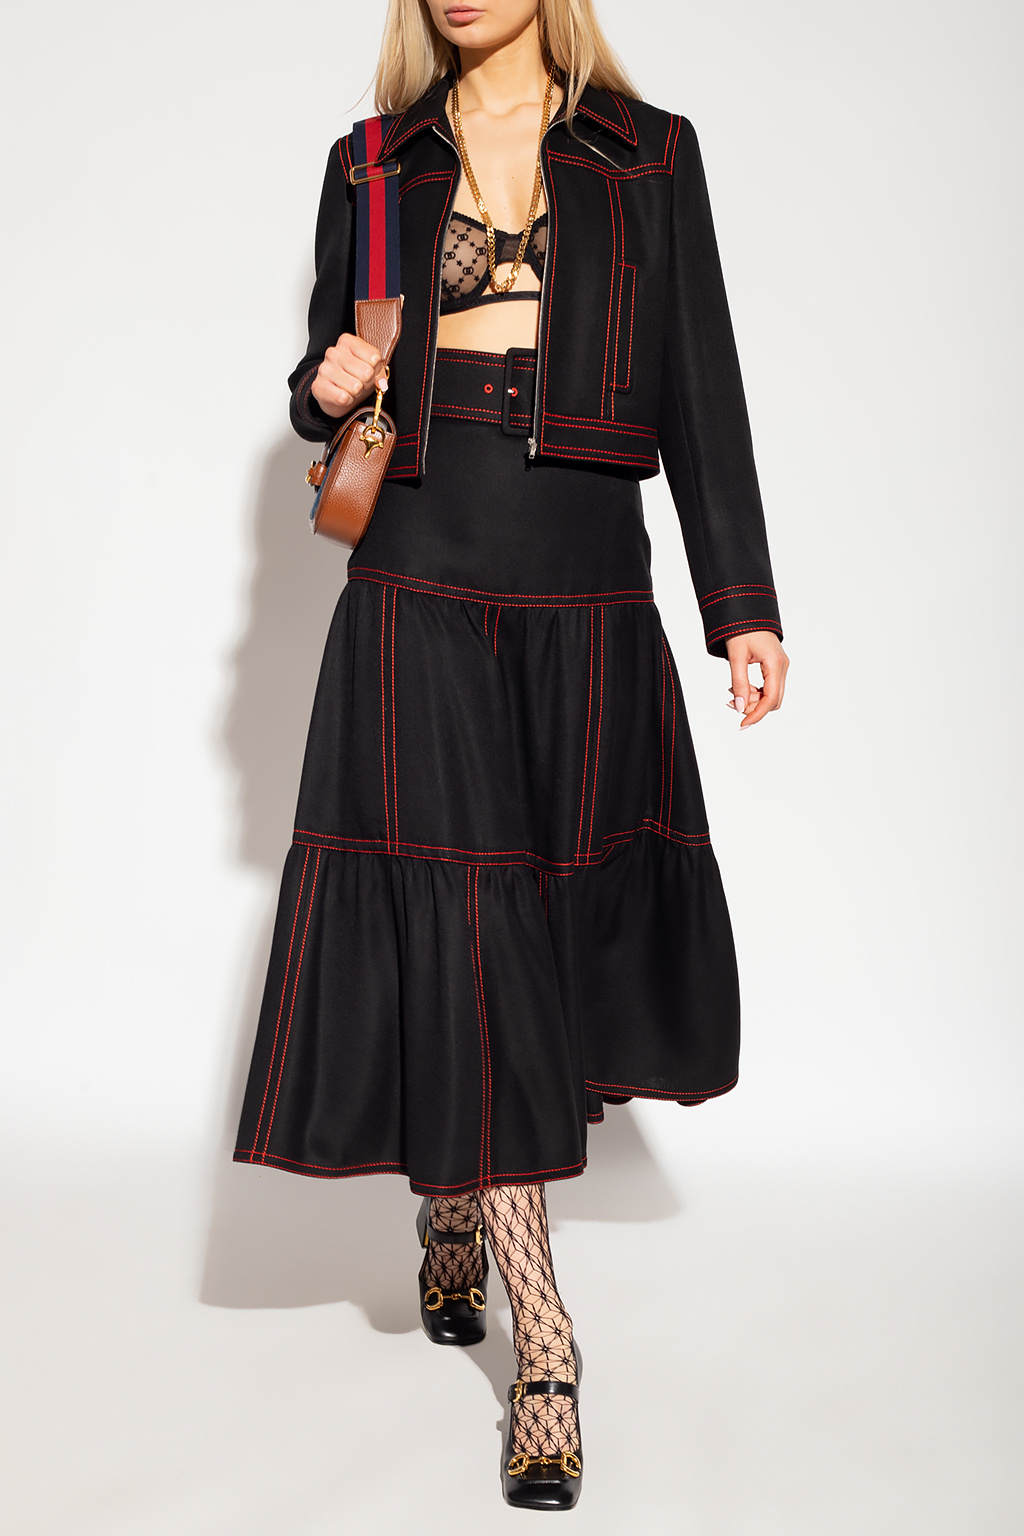 Gucci Skirt with belt